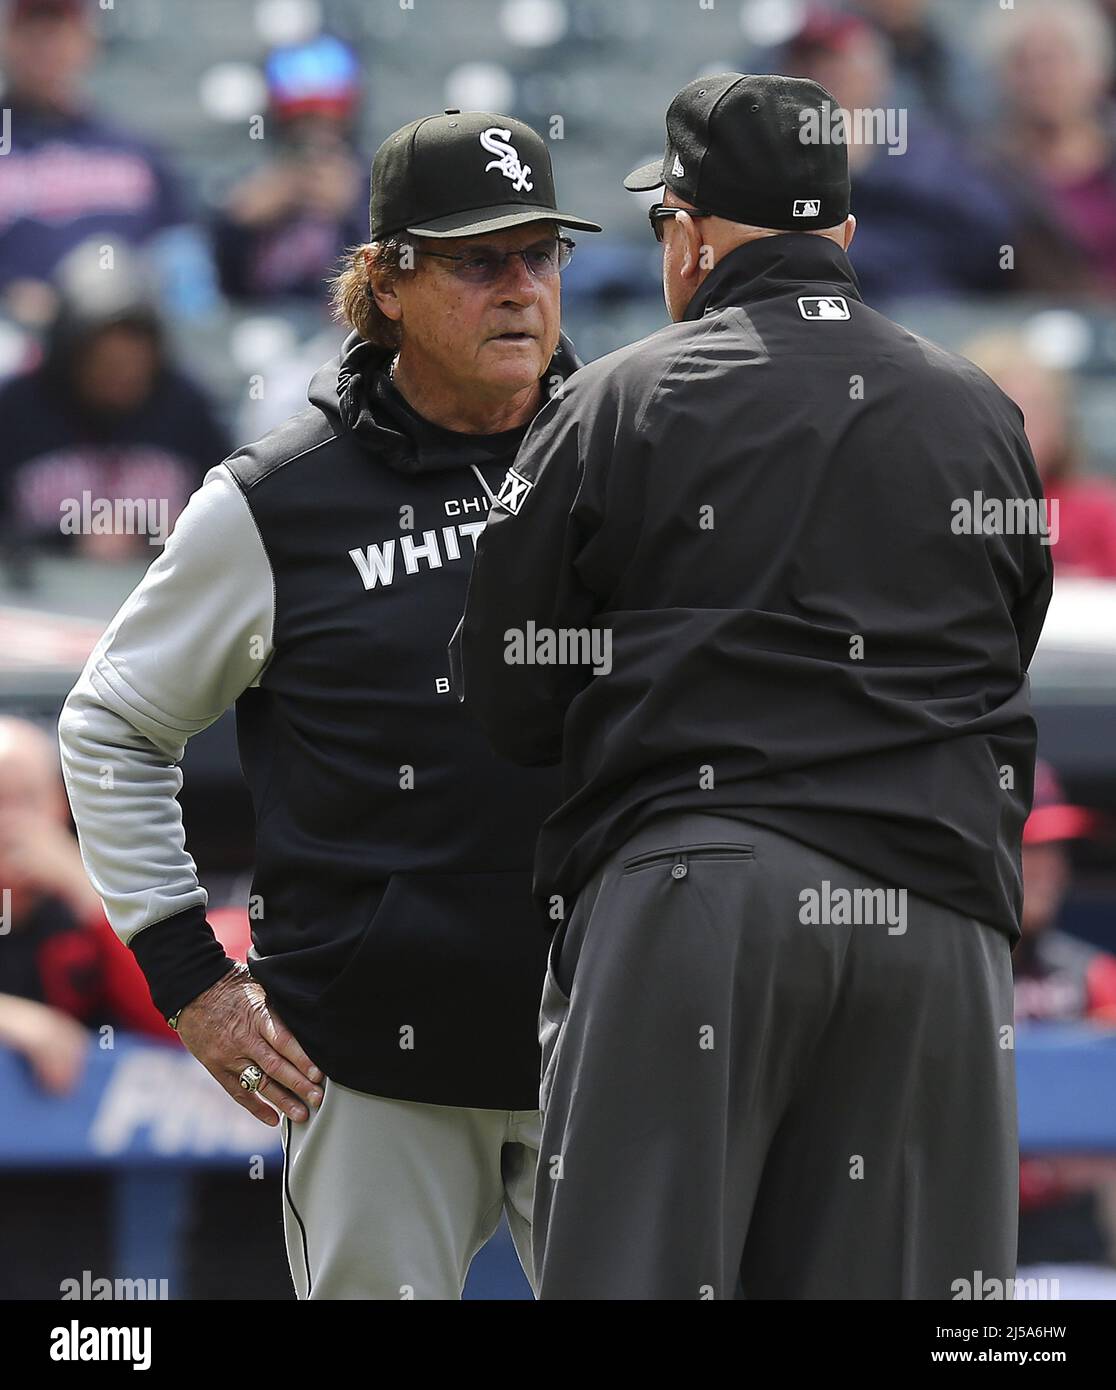 Cleveland, USA. 21st Apr, 2022. Chicago White Sox's manager Tony